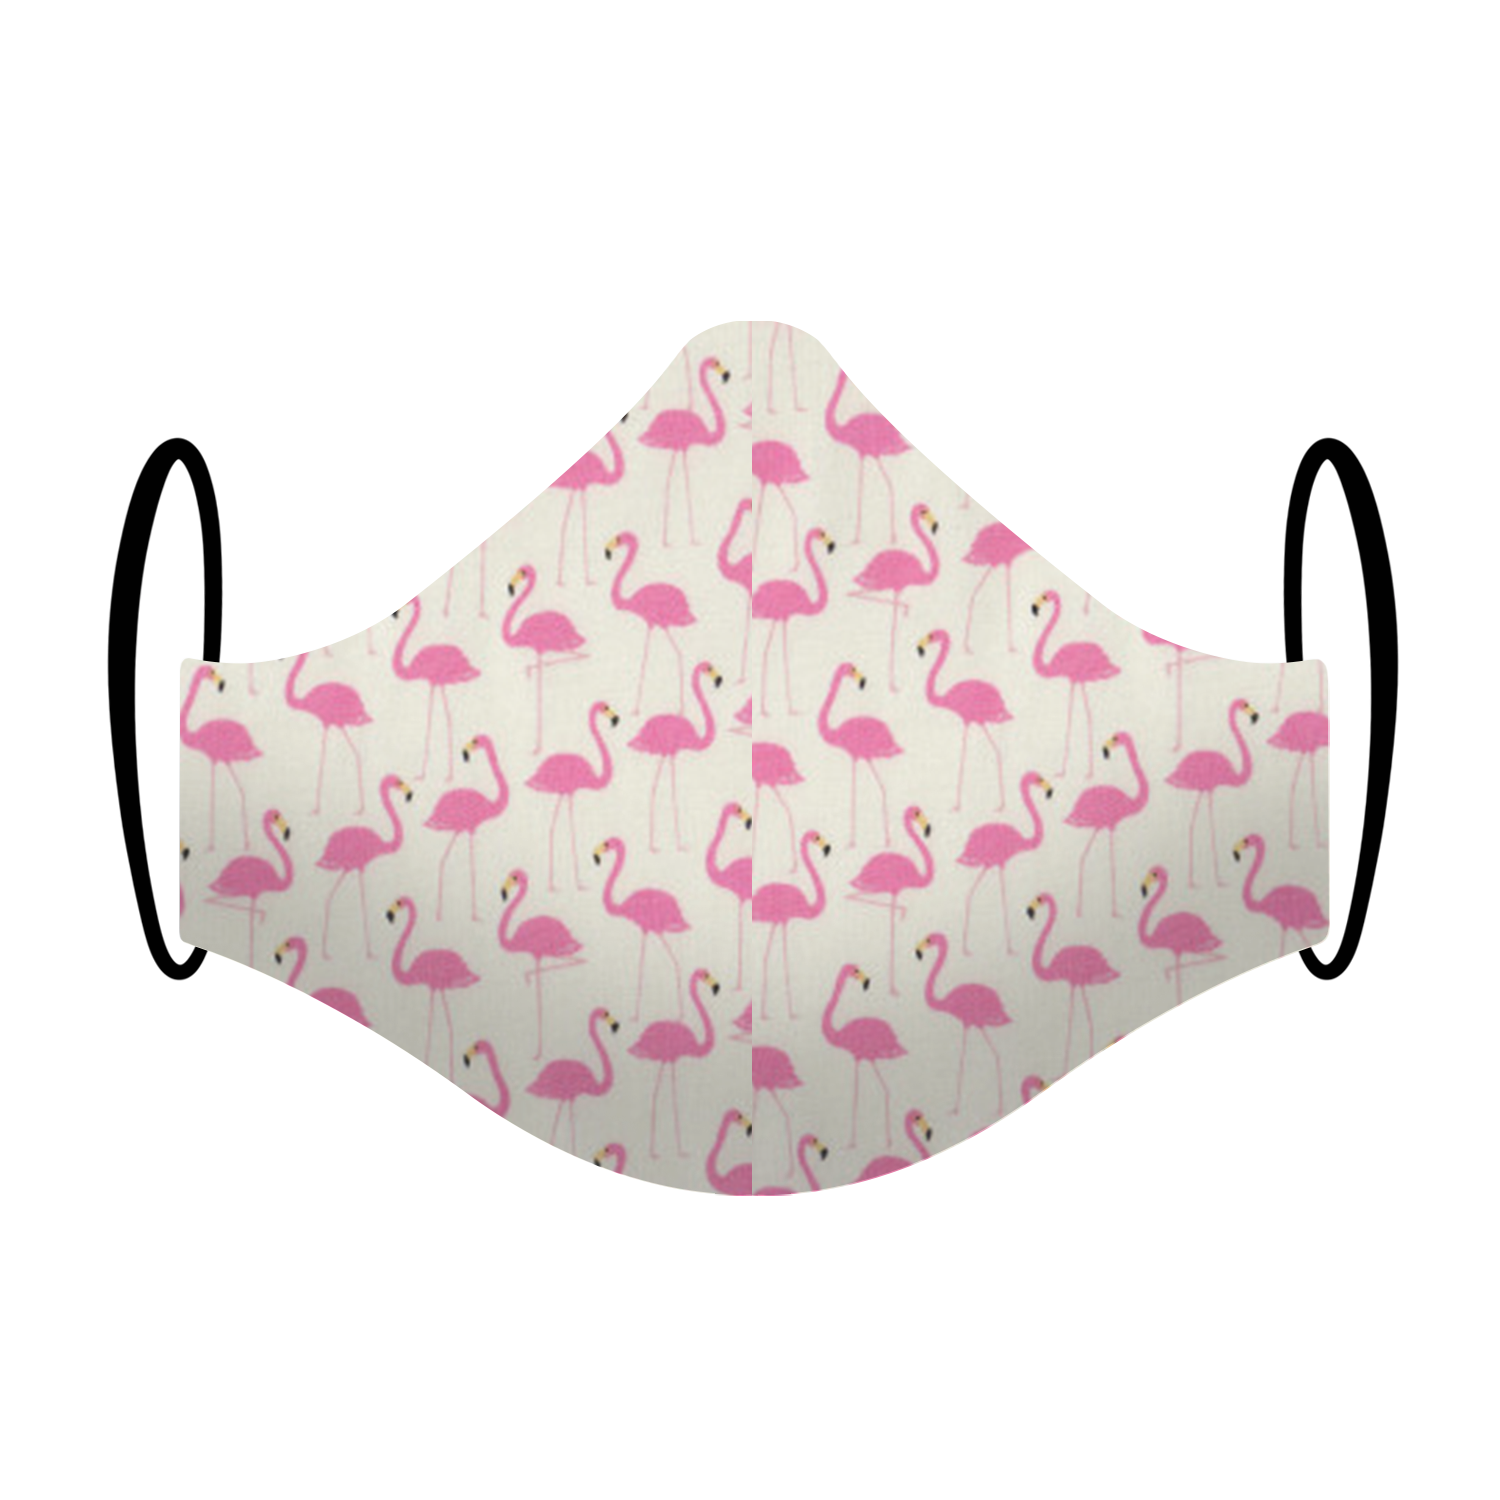 Triple layered face mask made in Melbourne Australia from cotton and poplin featuring a unique flamingo print